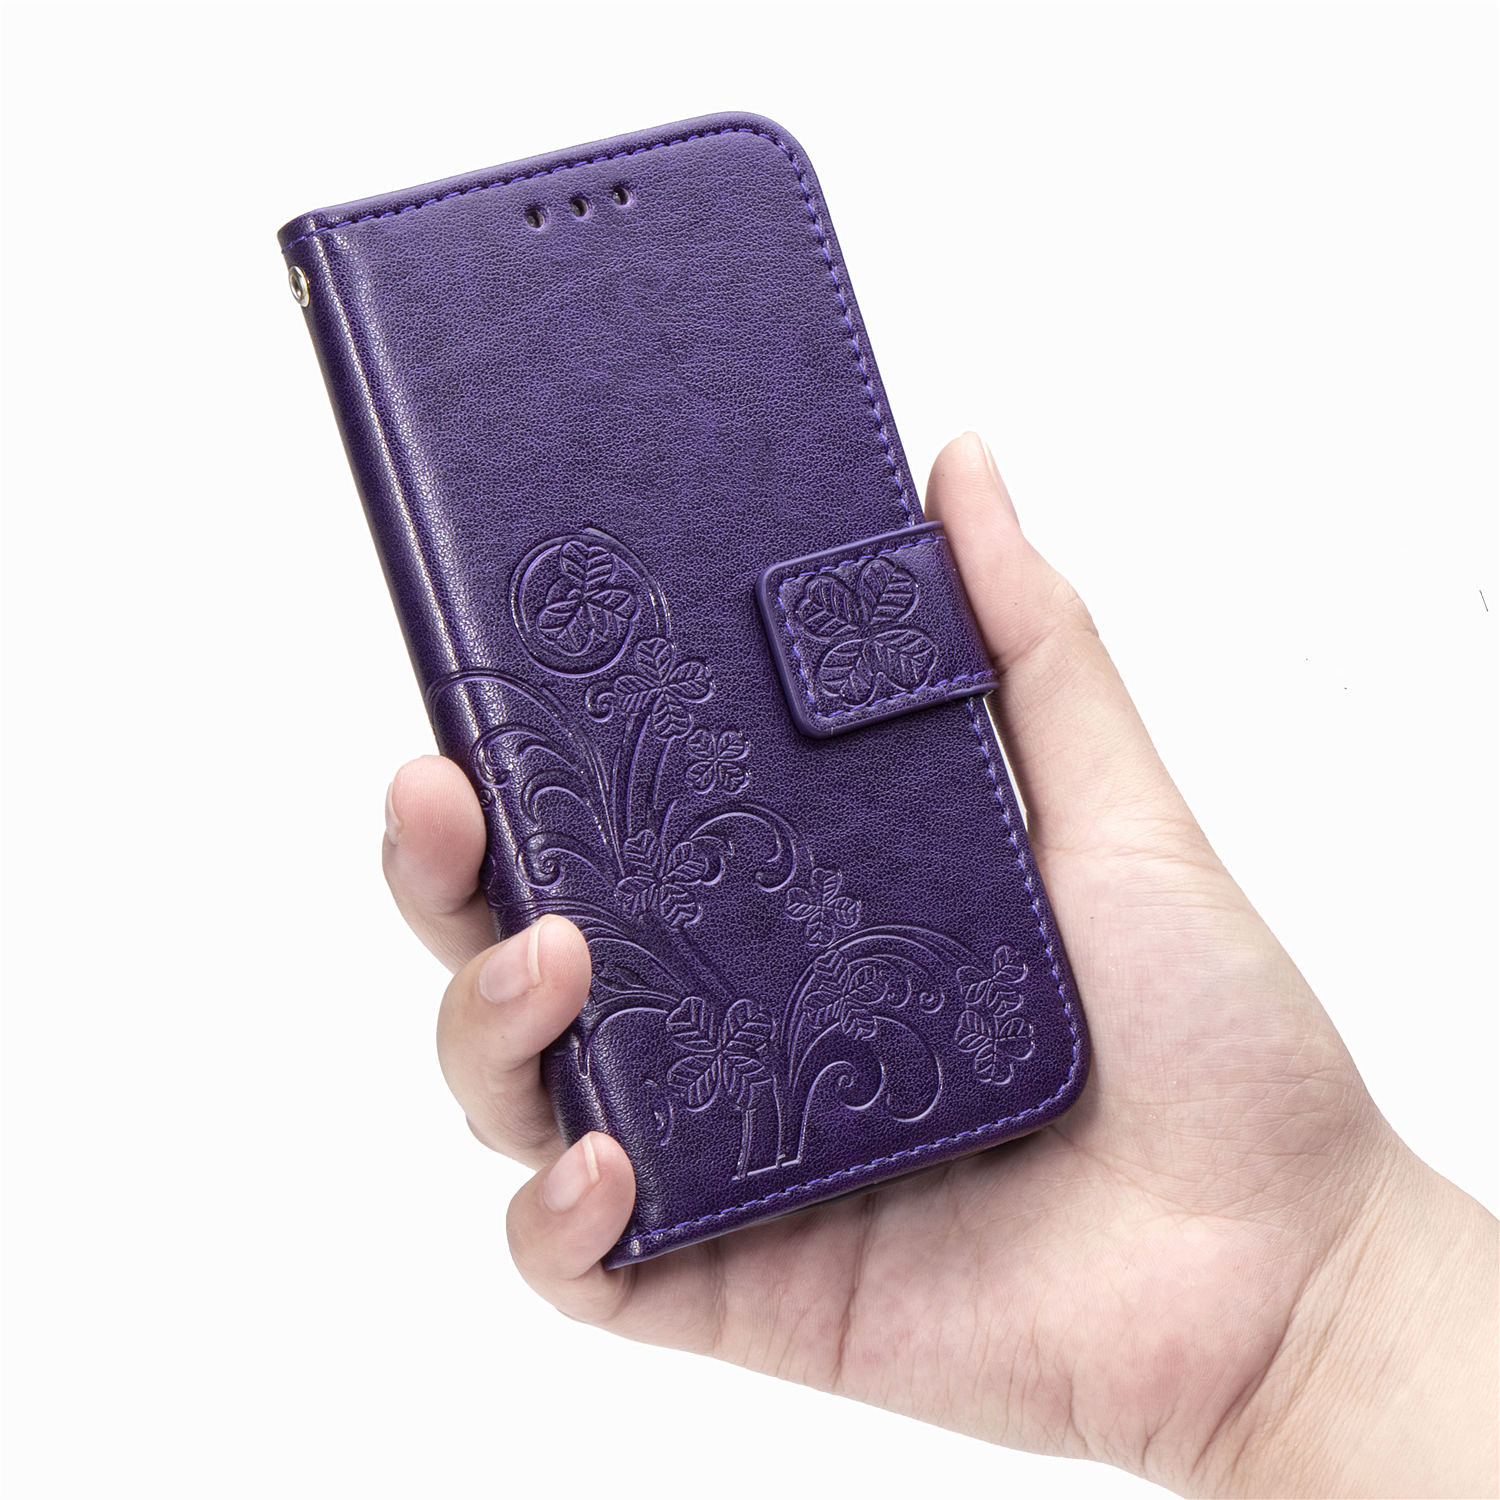 casing Xiaomi Mi K20 9T Pro CC9 e A3 9 Lite redmi 7A note 8 pro PU Phone case four leaf clover flower Bumper Flip Leather Protective Support Cover Magnetic Wallet card slot blue pink gray purple red